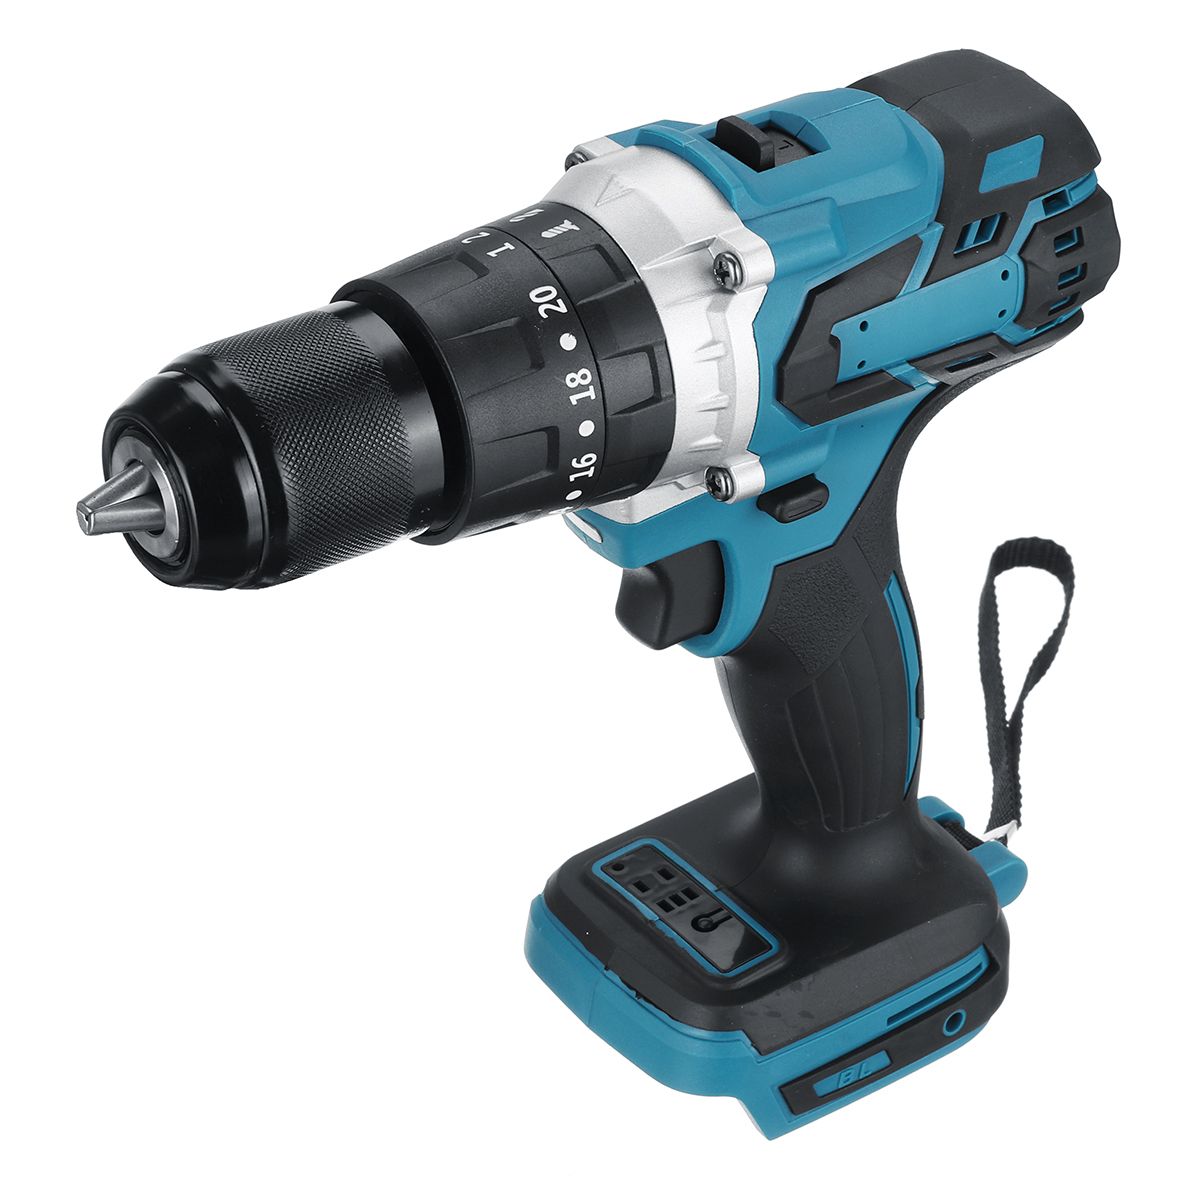 150Nm-Brushless-Cordless-Impact-Drill-3-in-1-1500RPM-Electric-Hammer-Drill-Screwdriver-with-LED-Work-1652355